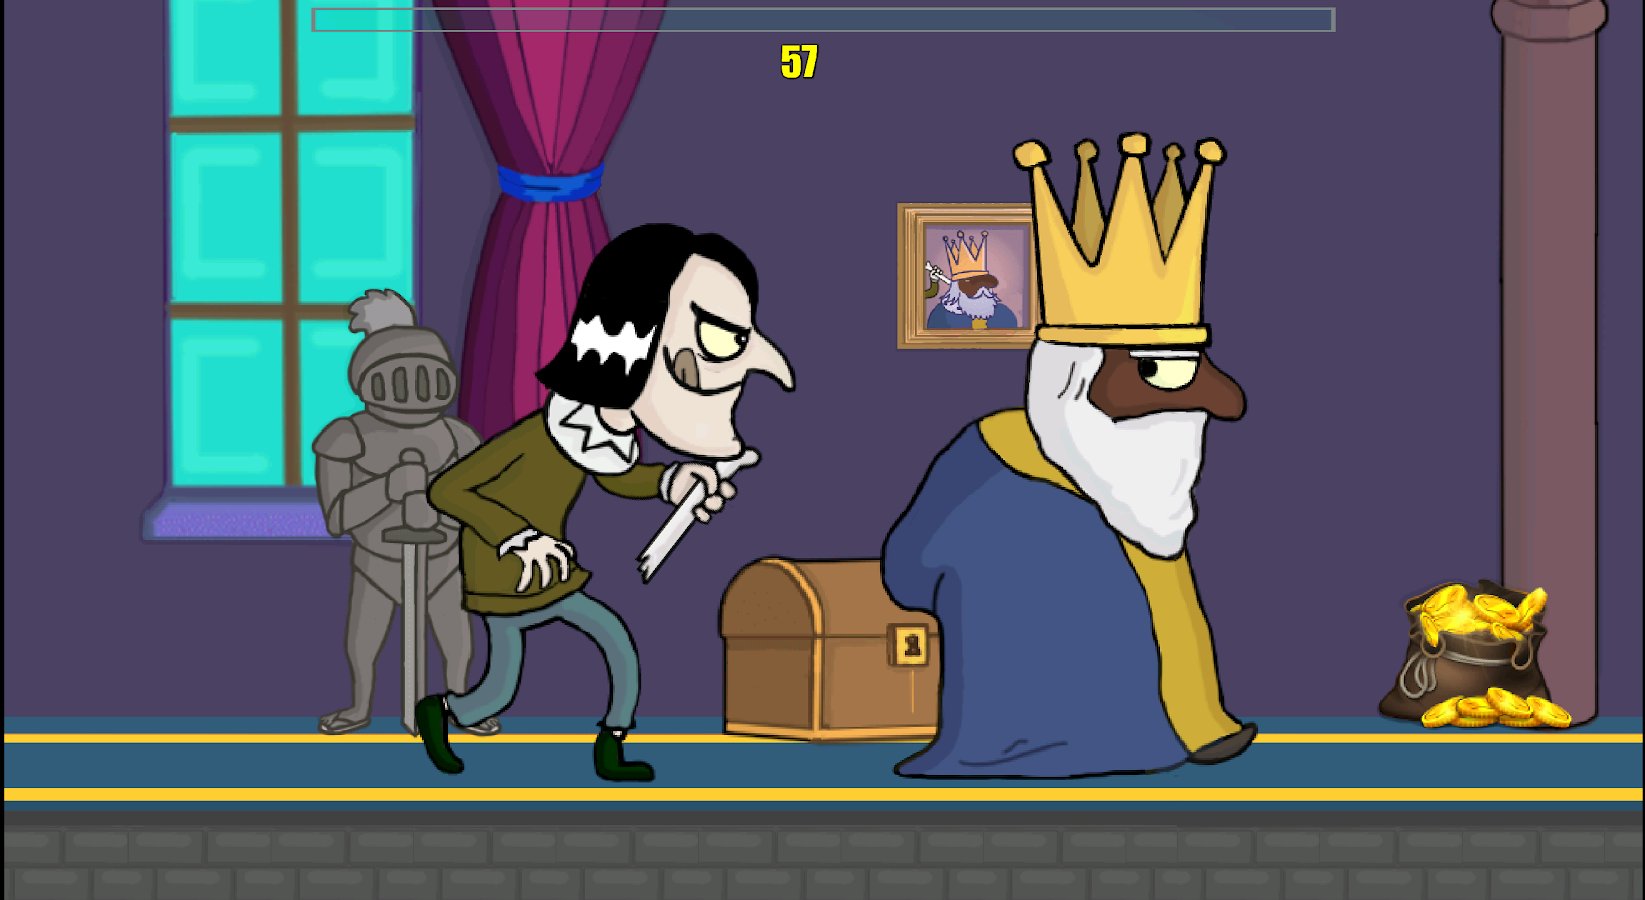 Be king game. Murder игра. Be the King игра. King Murder игра. Murder be the King.